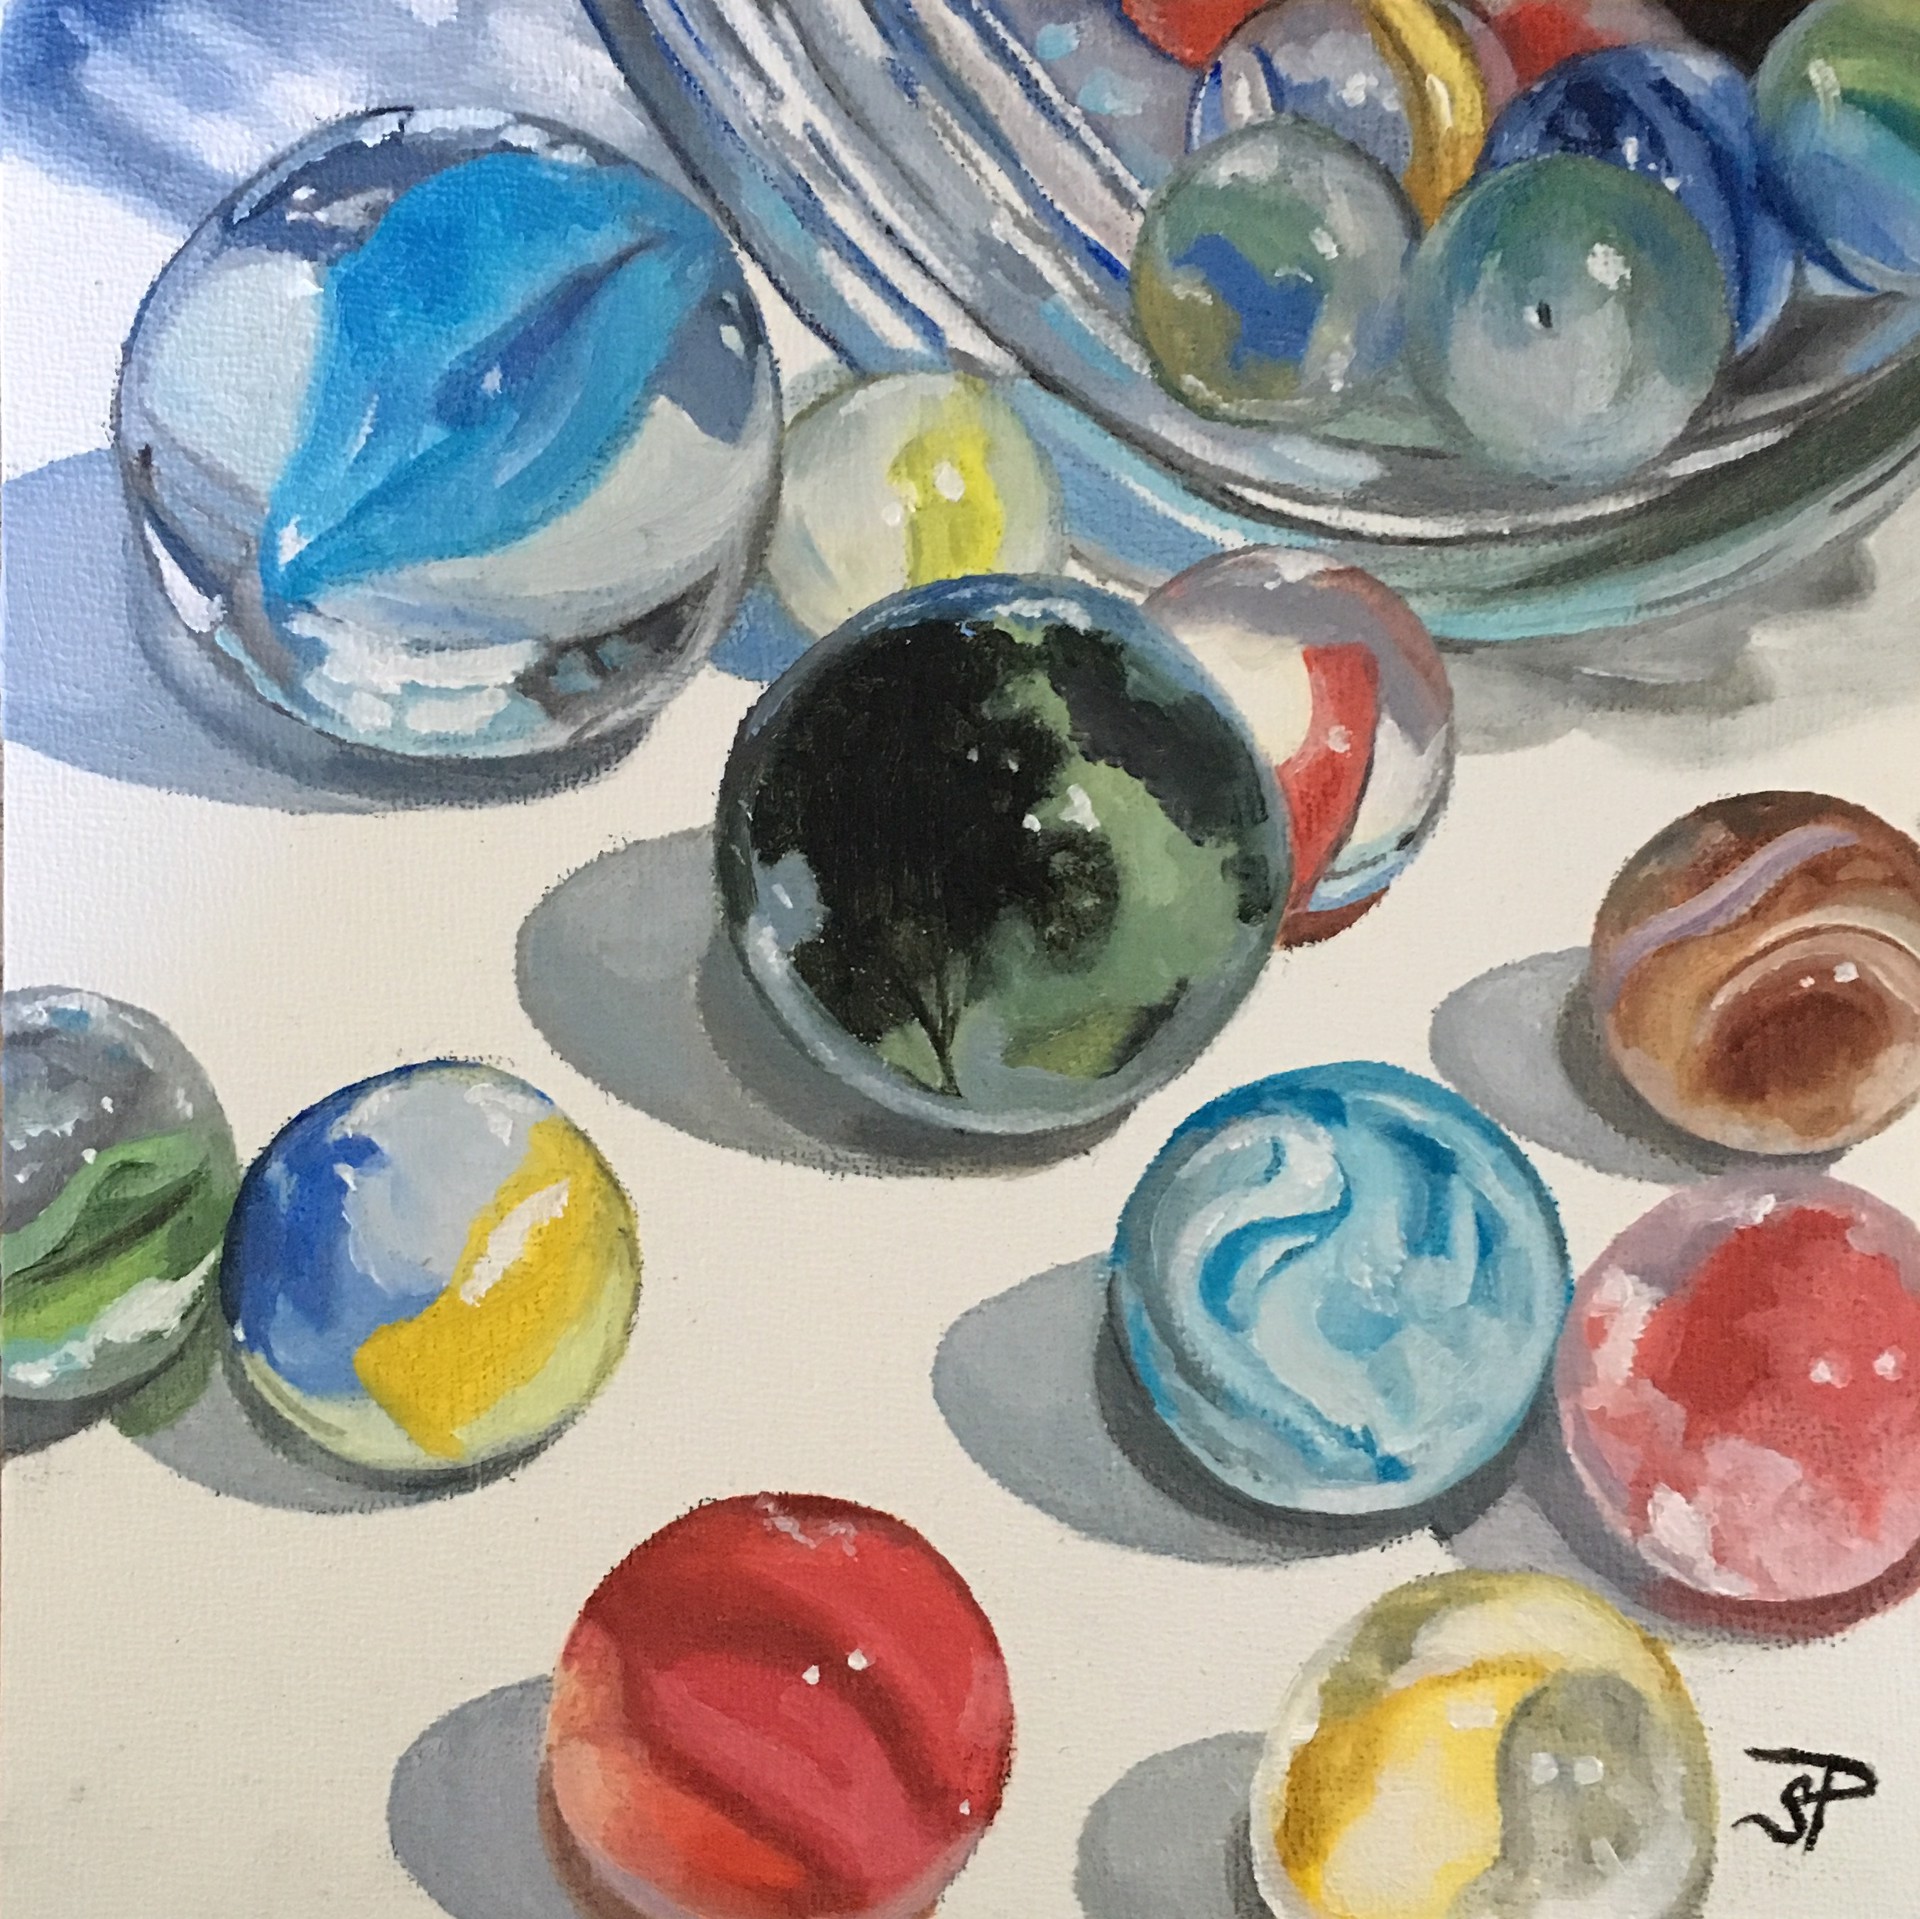 Losing My Marbles by Sharon Pomales